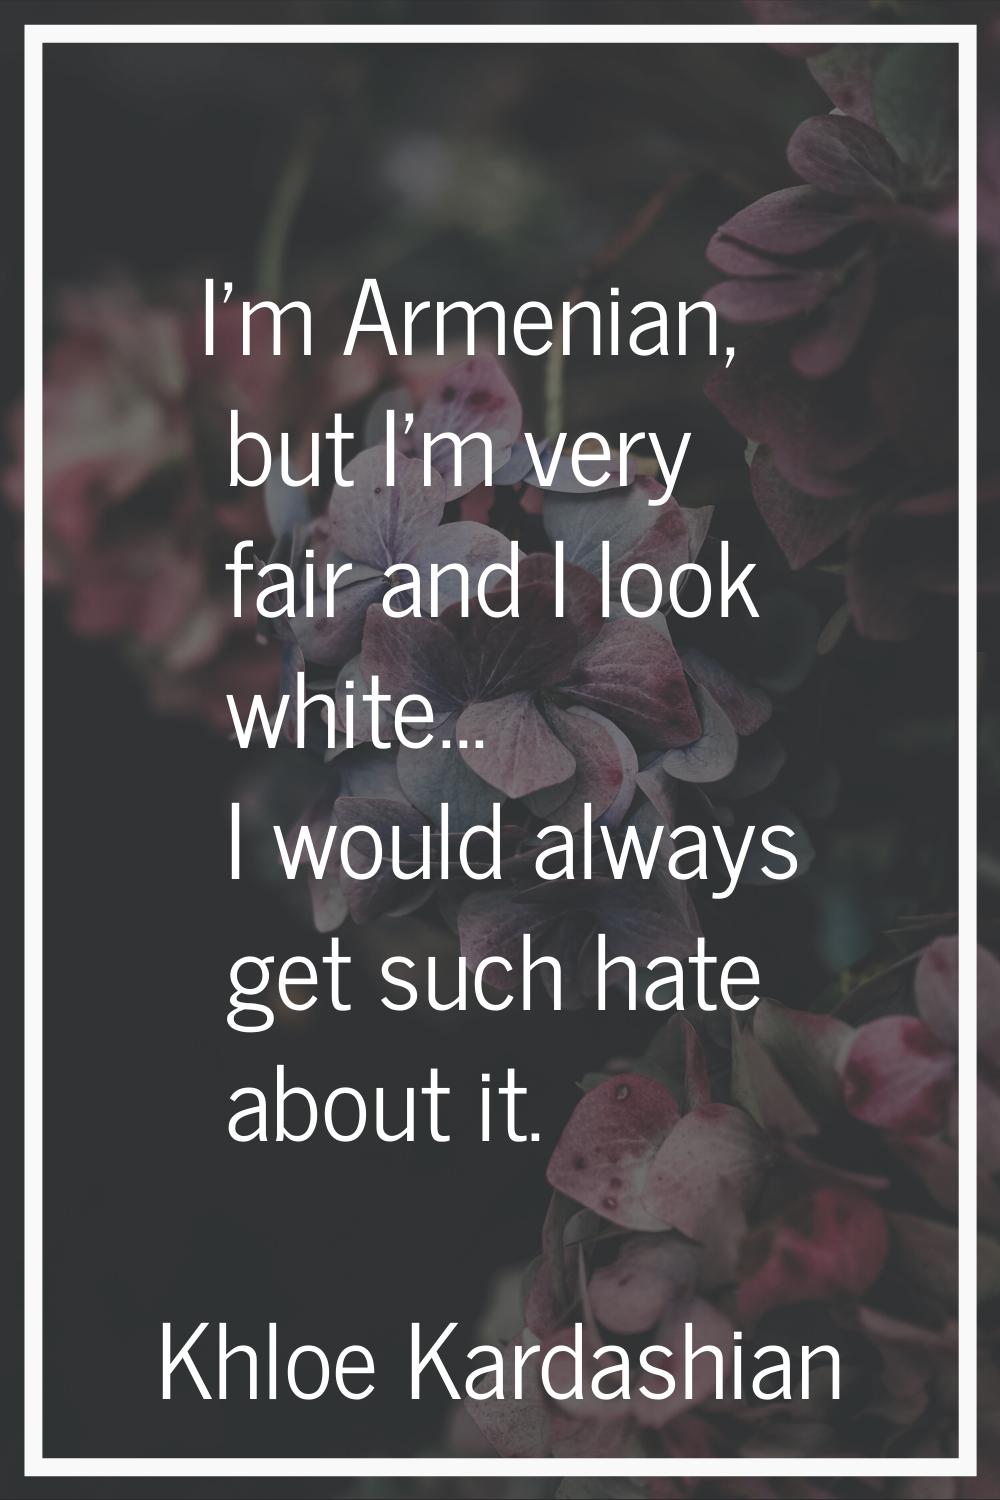 I'm Armenian, but I'm very fair and I look white... I would always get such hate about it.